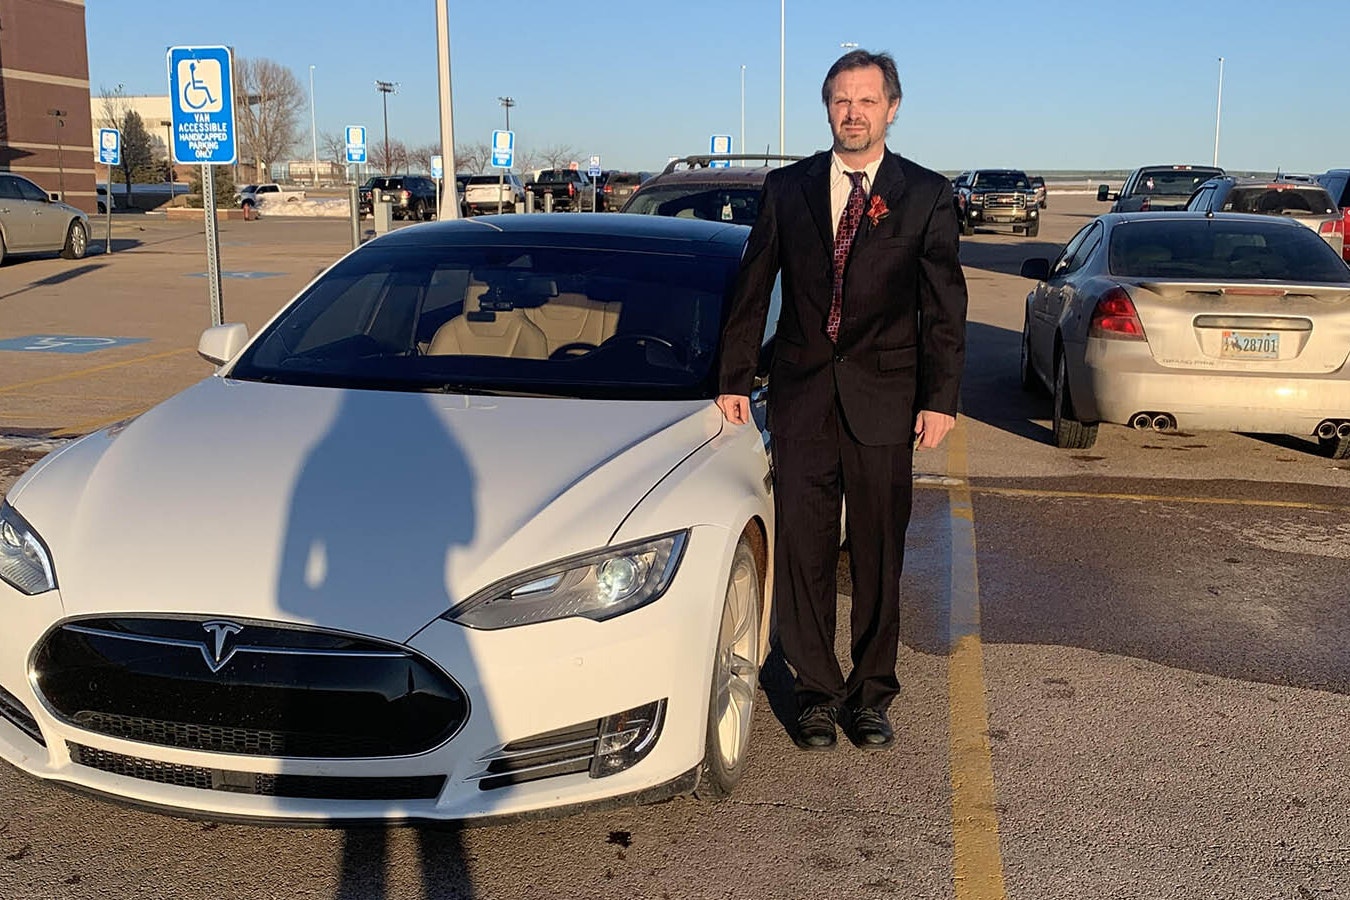 Don Adams lives in Gillette and drives his Tesla for Uber. He said that at times, "I get a lot of crap" about driving his EV around the coal capitol of the nation.